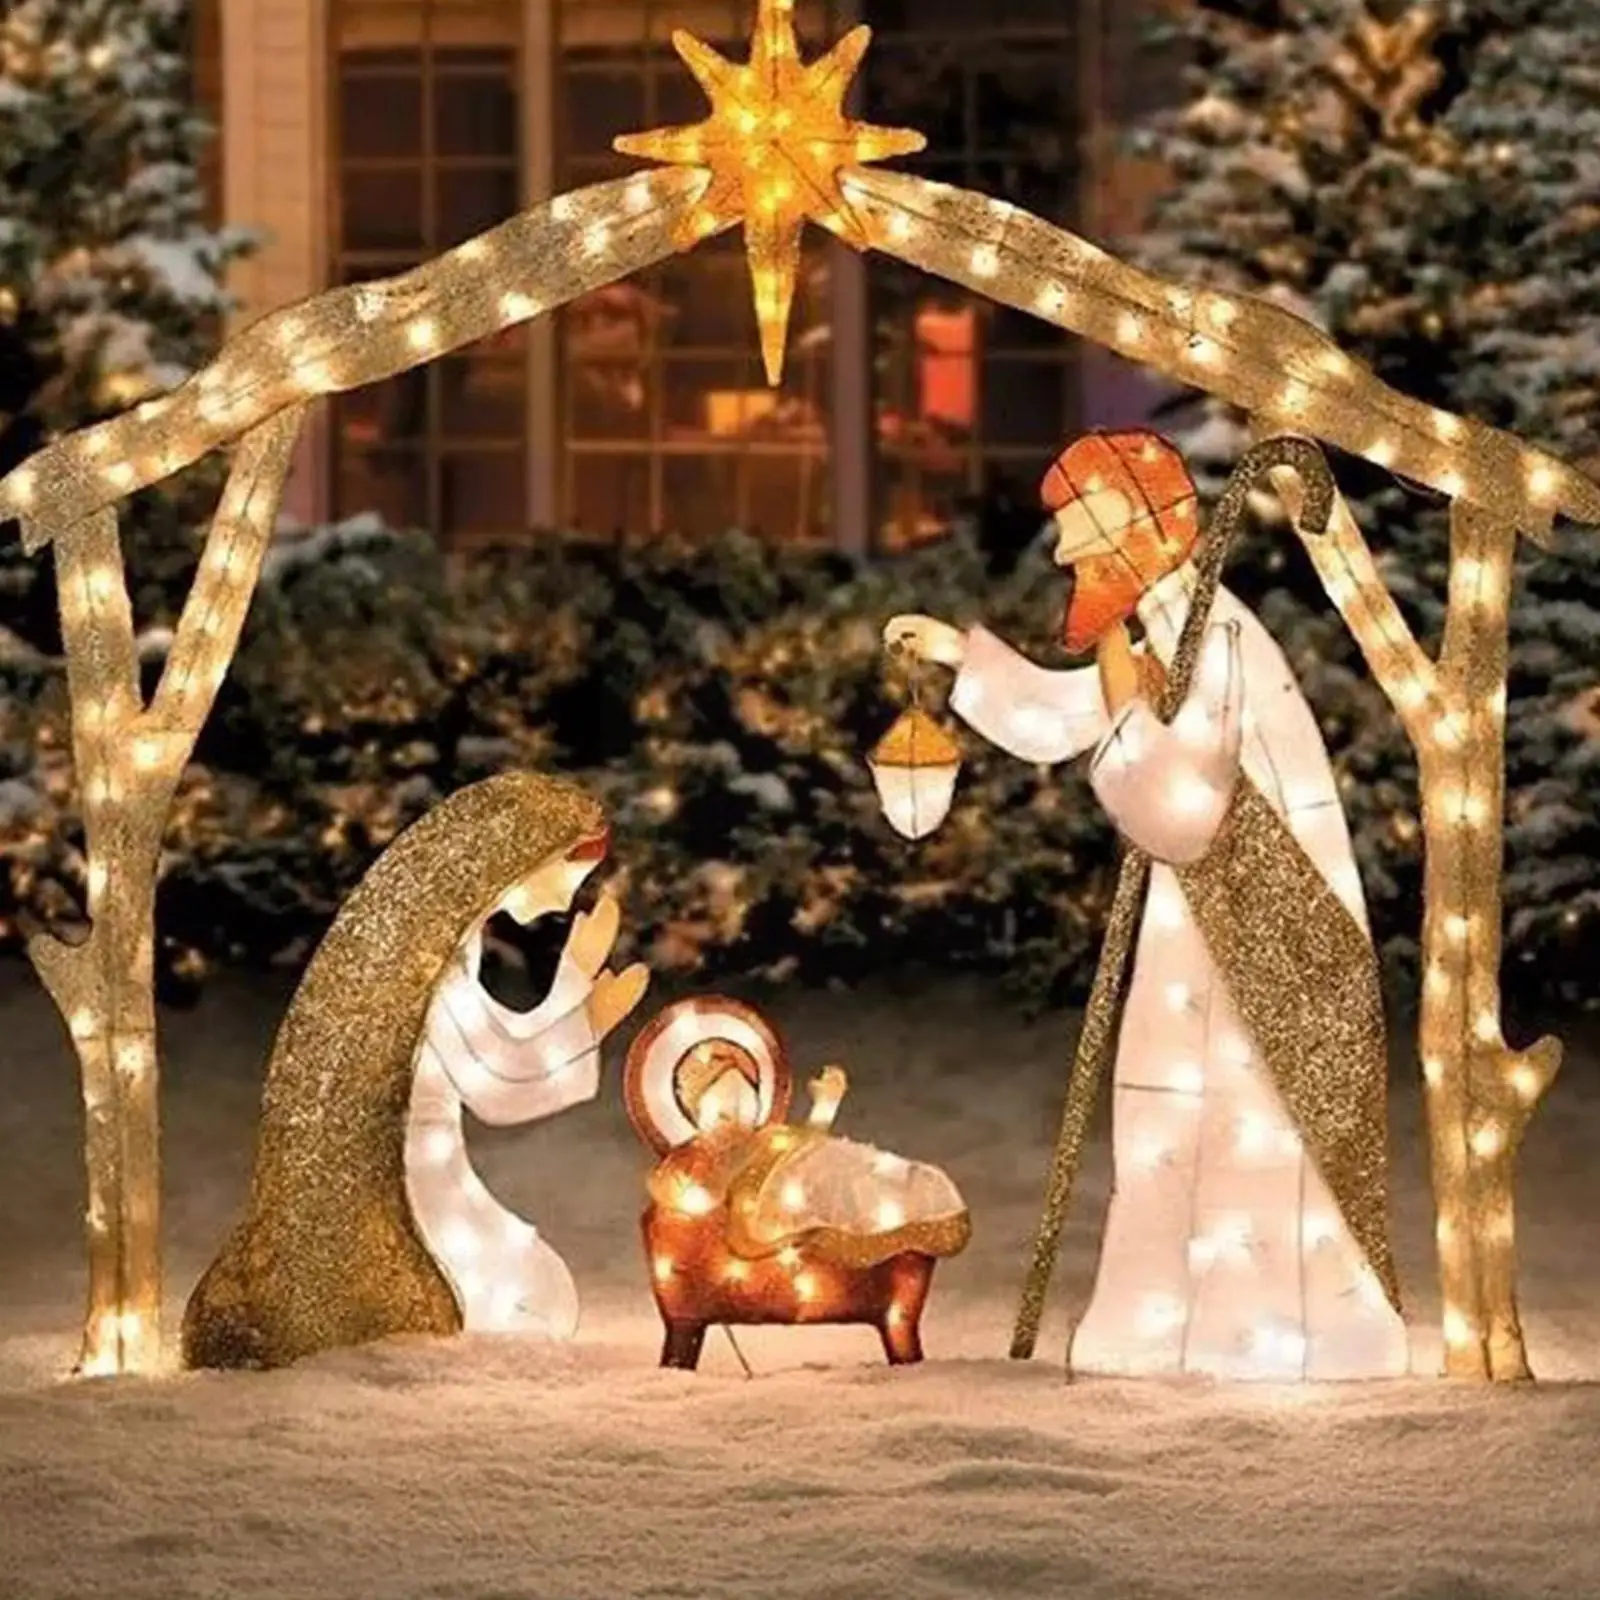 

Tinsel Nativity Scene Warm White Yard Plane Painting For Easter Christmas Outdoor Yard Garden Decorations Event Decoration E2K1